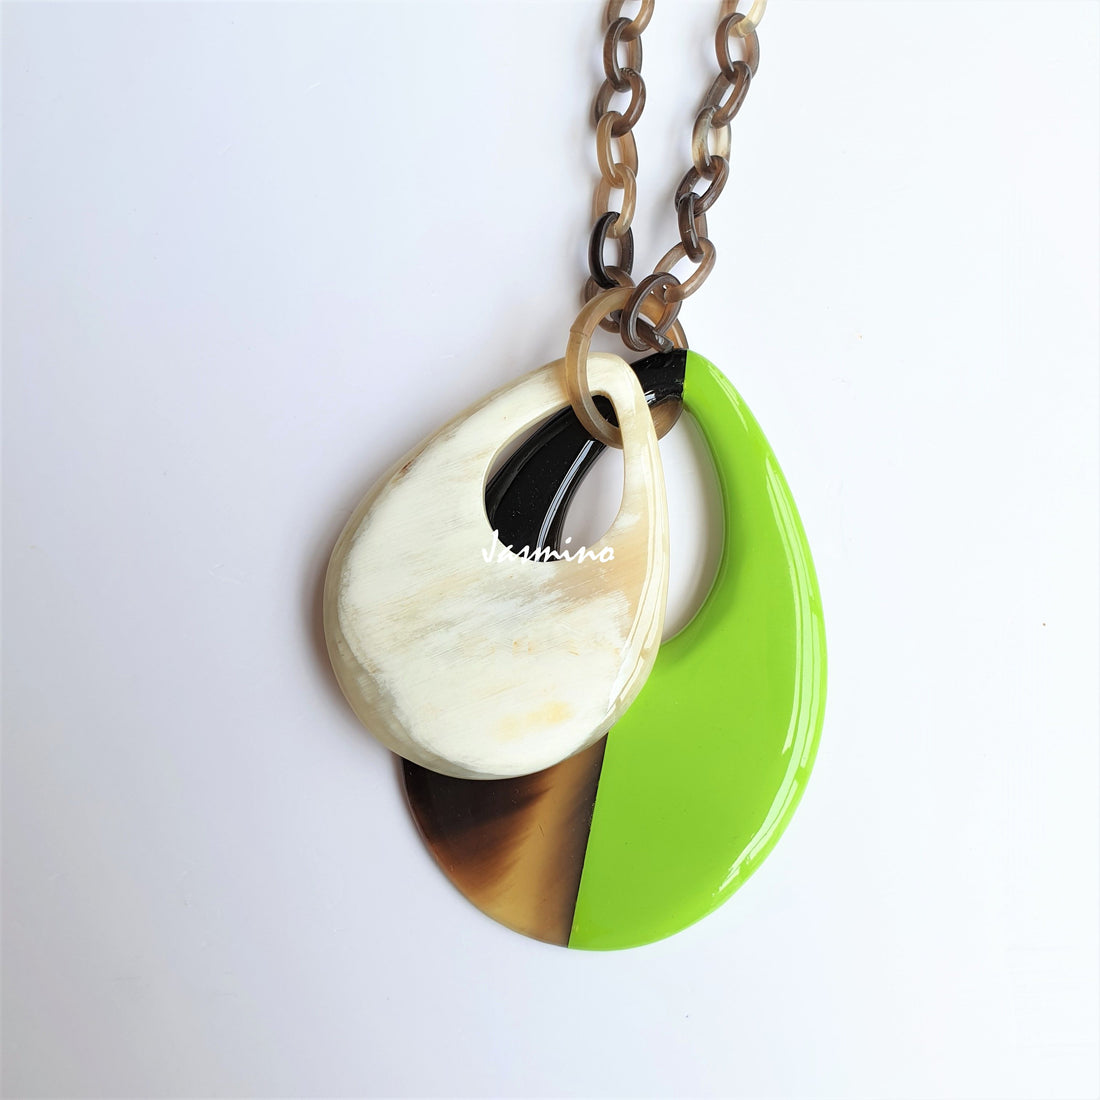 Handmade Vintage double teardrop pendant features a green and white colour made of natural buffalo horn